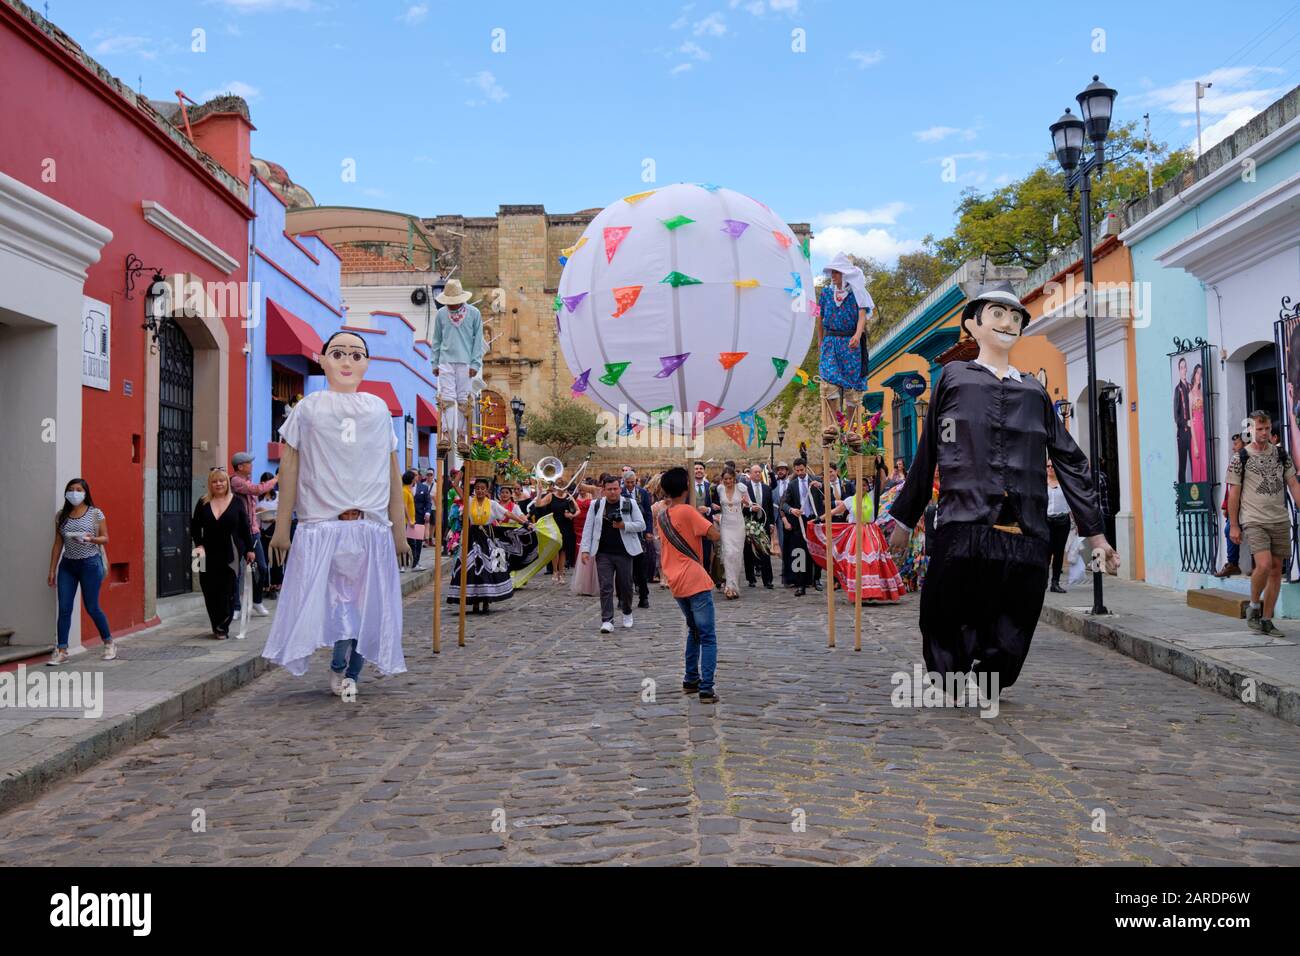 Traditional wedding parade (Calenda de Bodas) on the streets of Oaxaca lead by puppets depicting bride and groom. Stock Photo